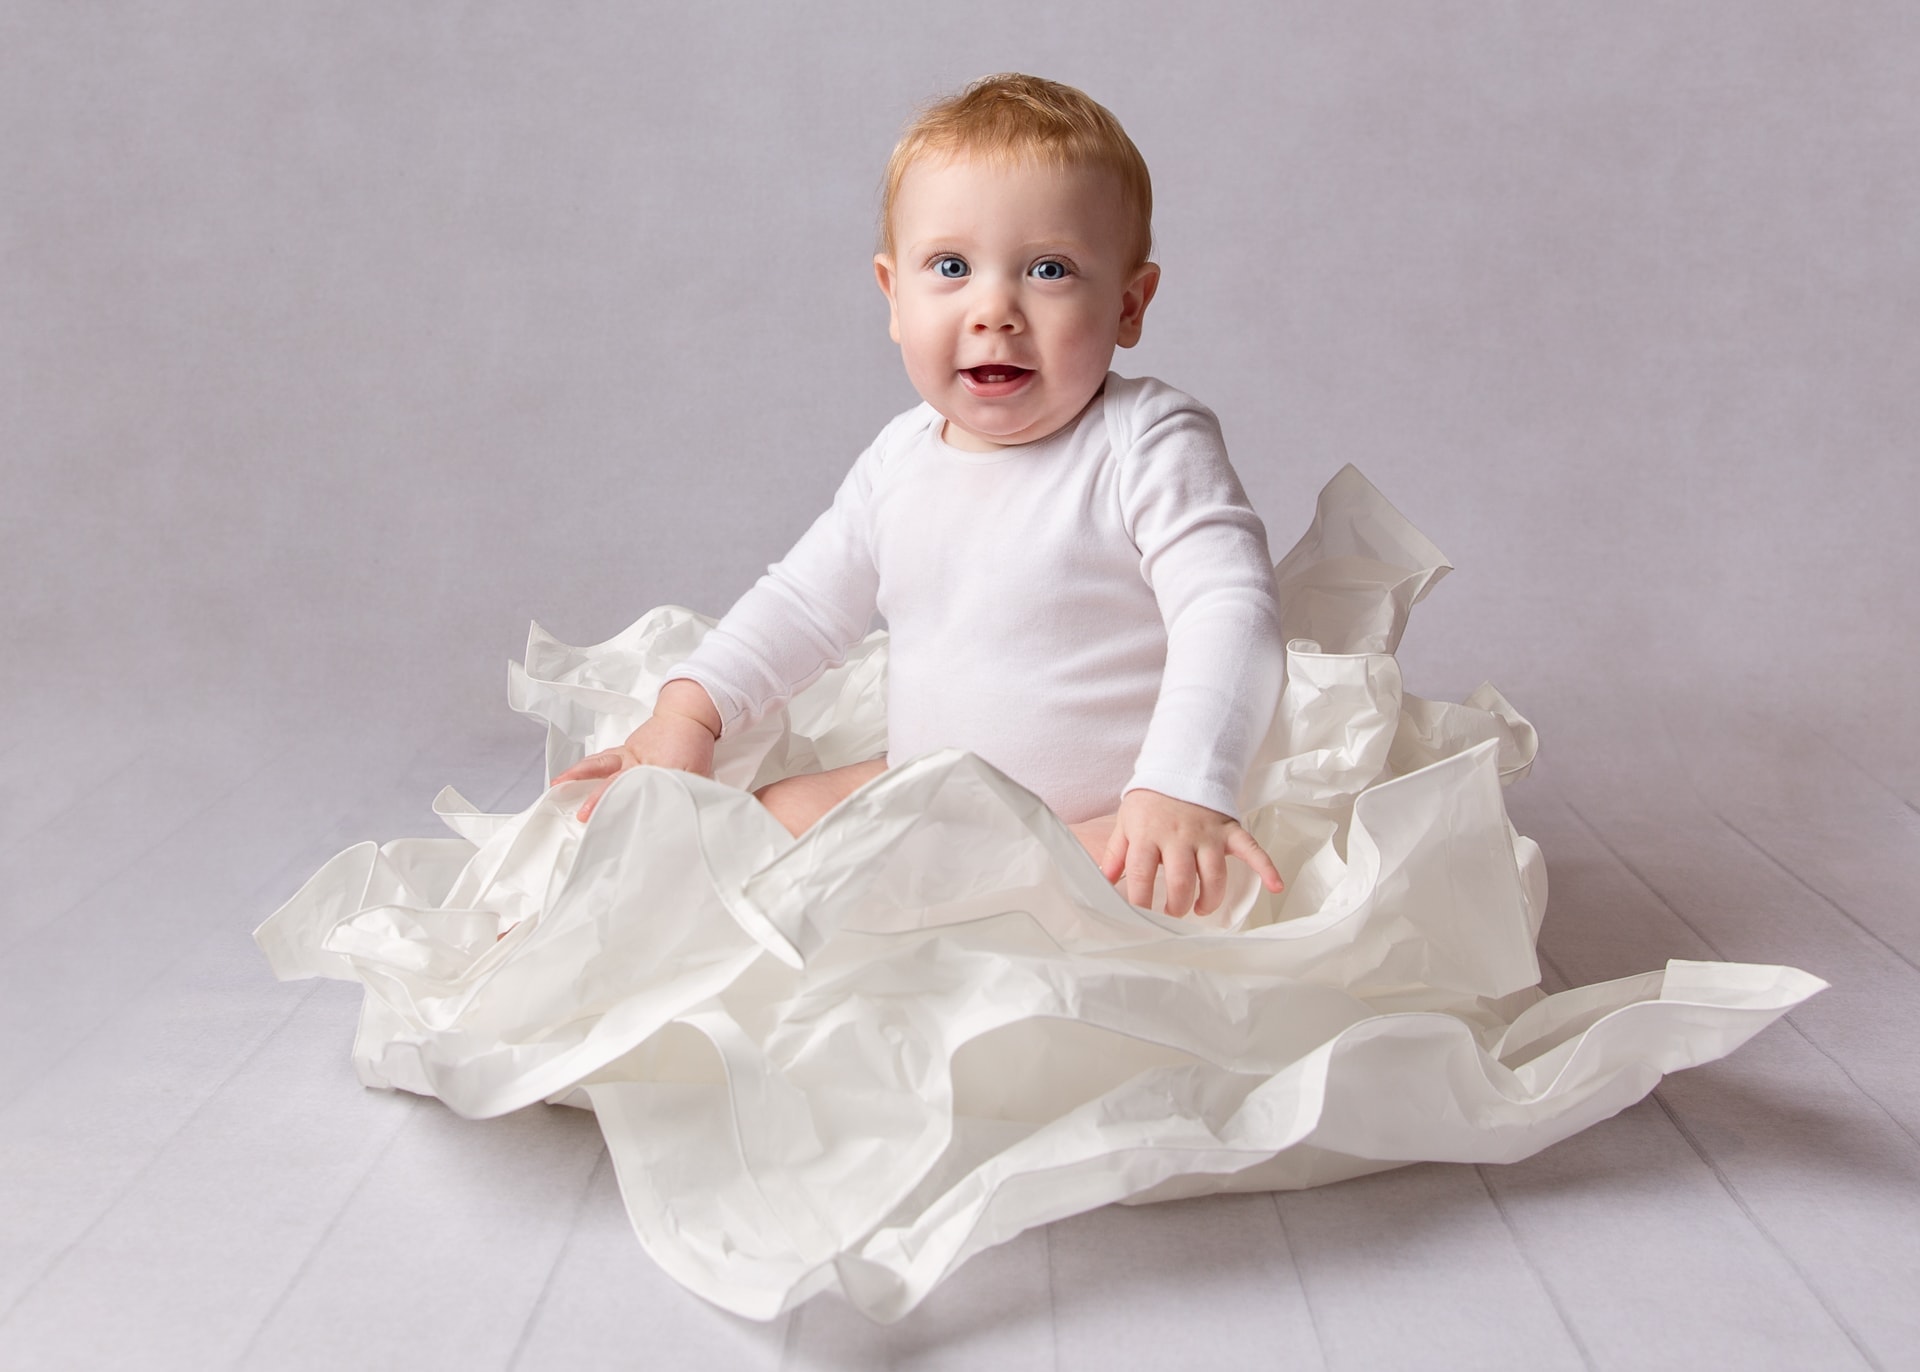 Six month old baby boy wearing white vest sitting in white paper on baby photoshoot